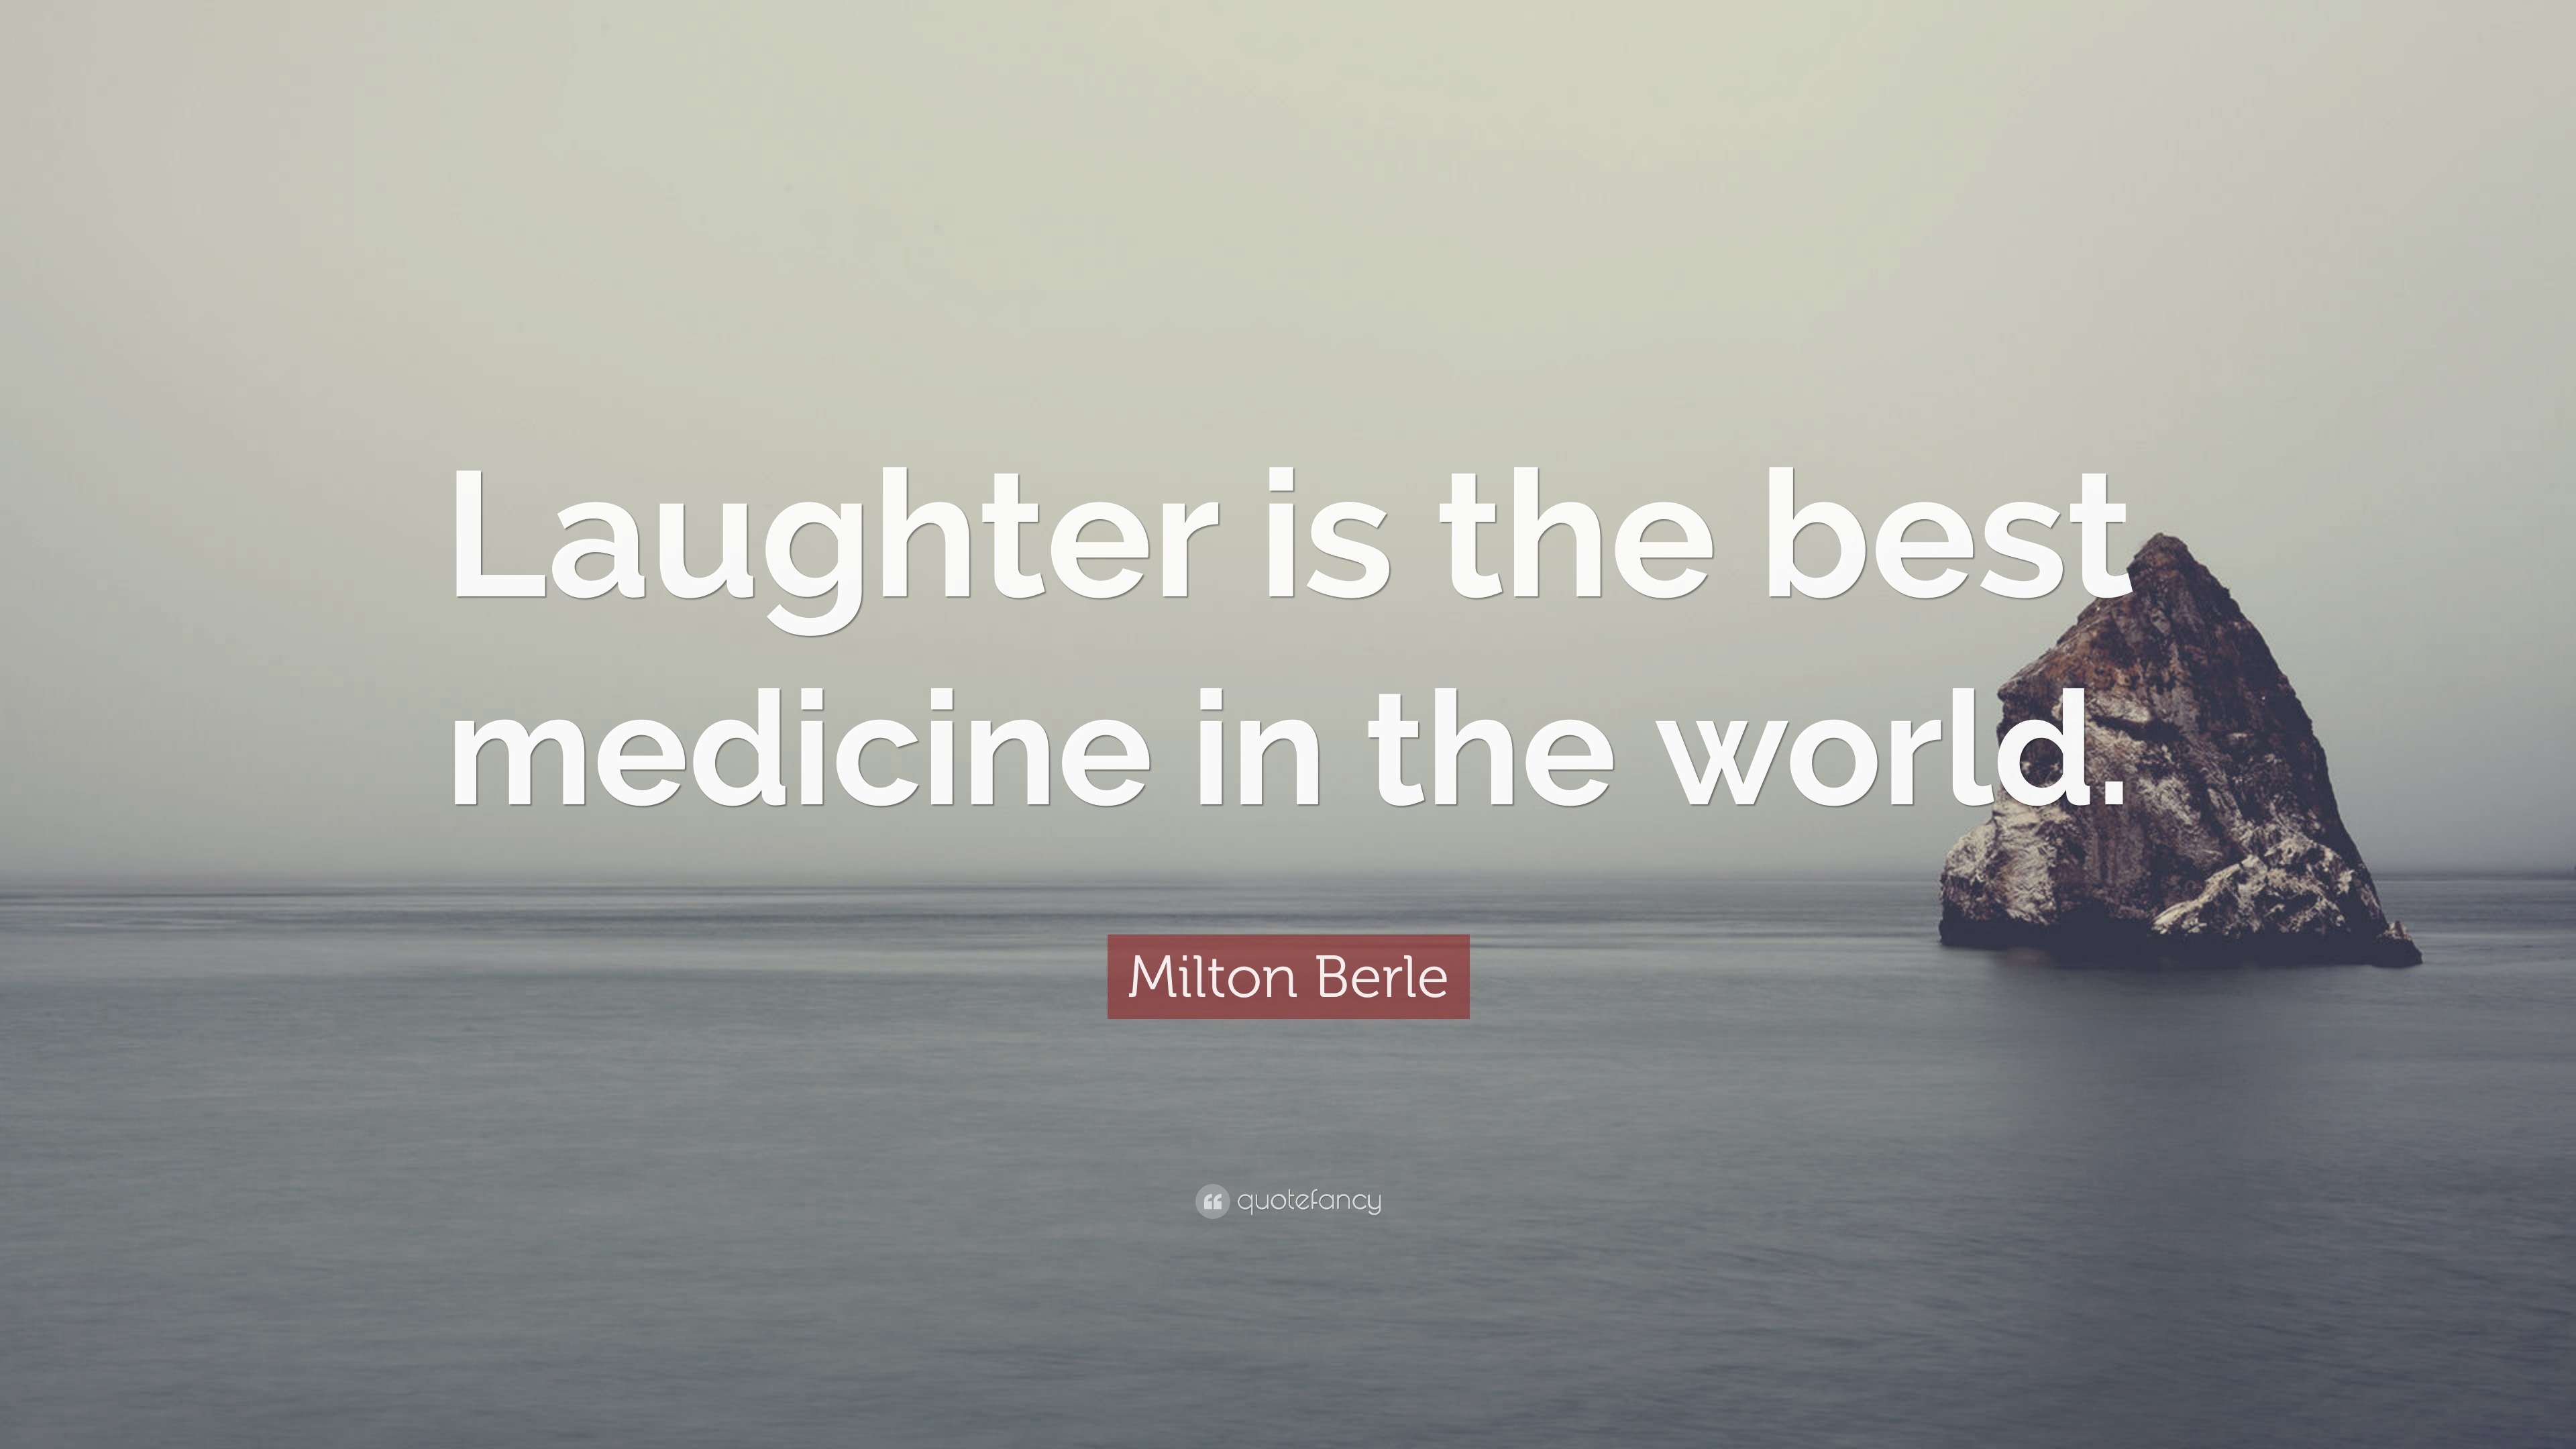 Milton Berle Quote: “Laughter is the best medicine in the world.”